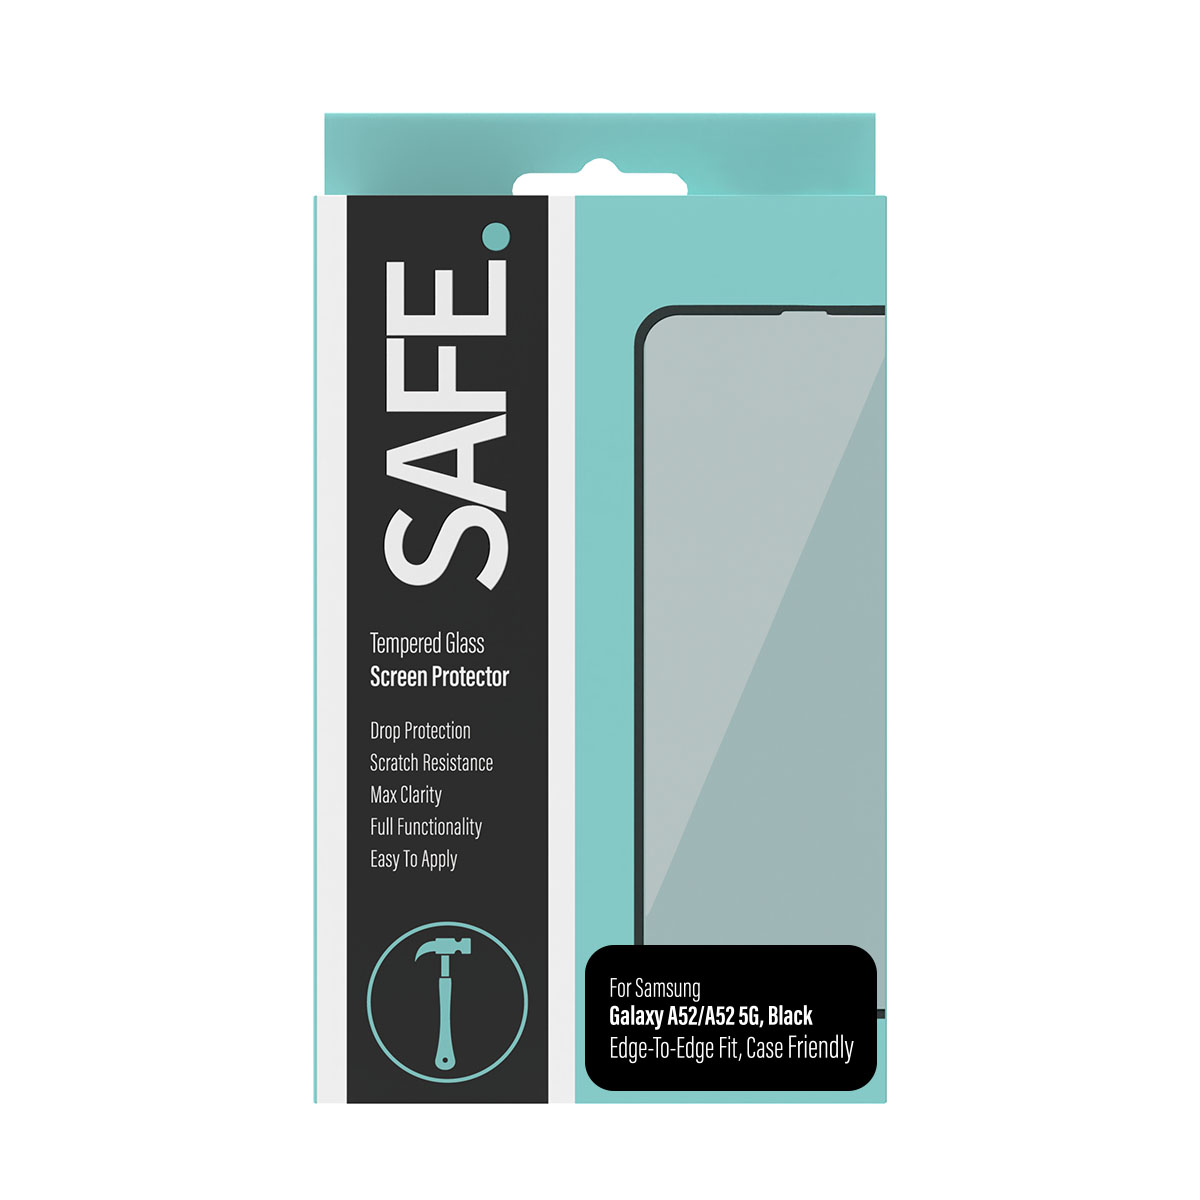 SAFE Samsung Galaxy A52 / A52 5G - Screen Protector - Drop Protective, Scratch Resistance, Max Clarity